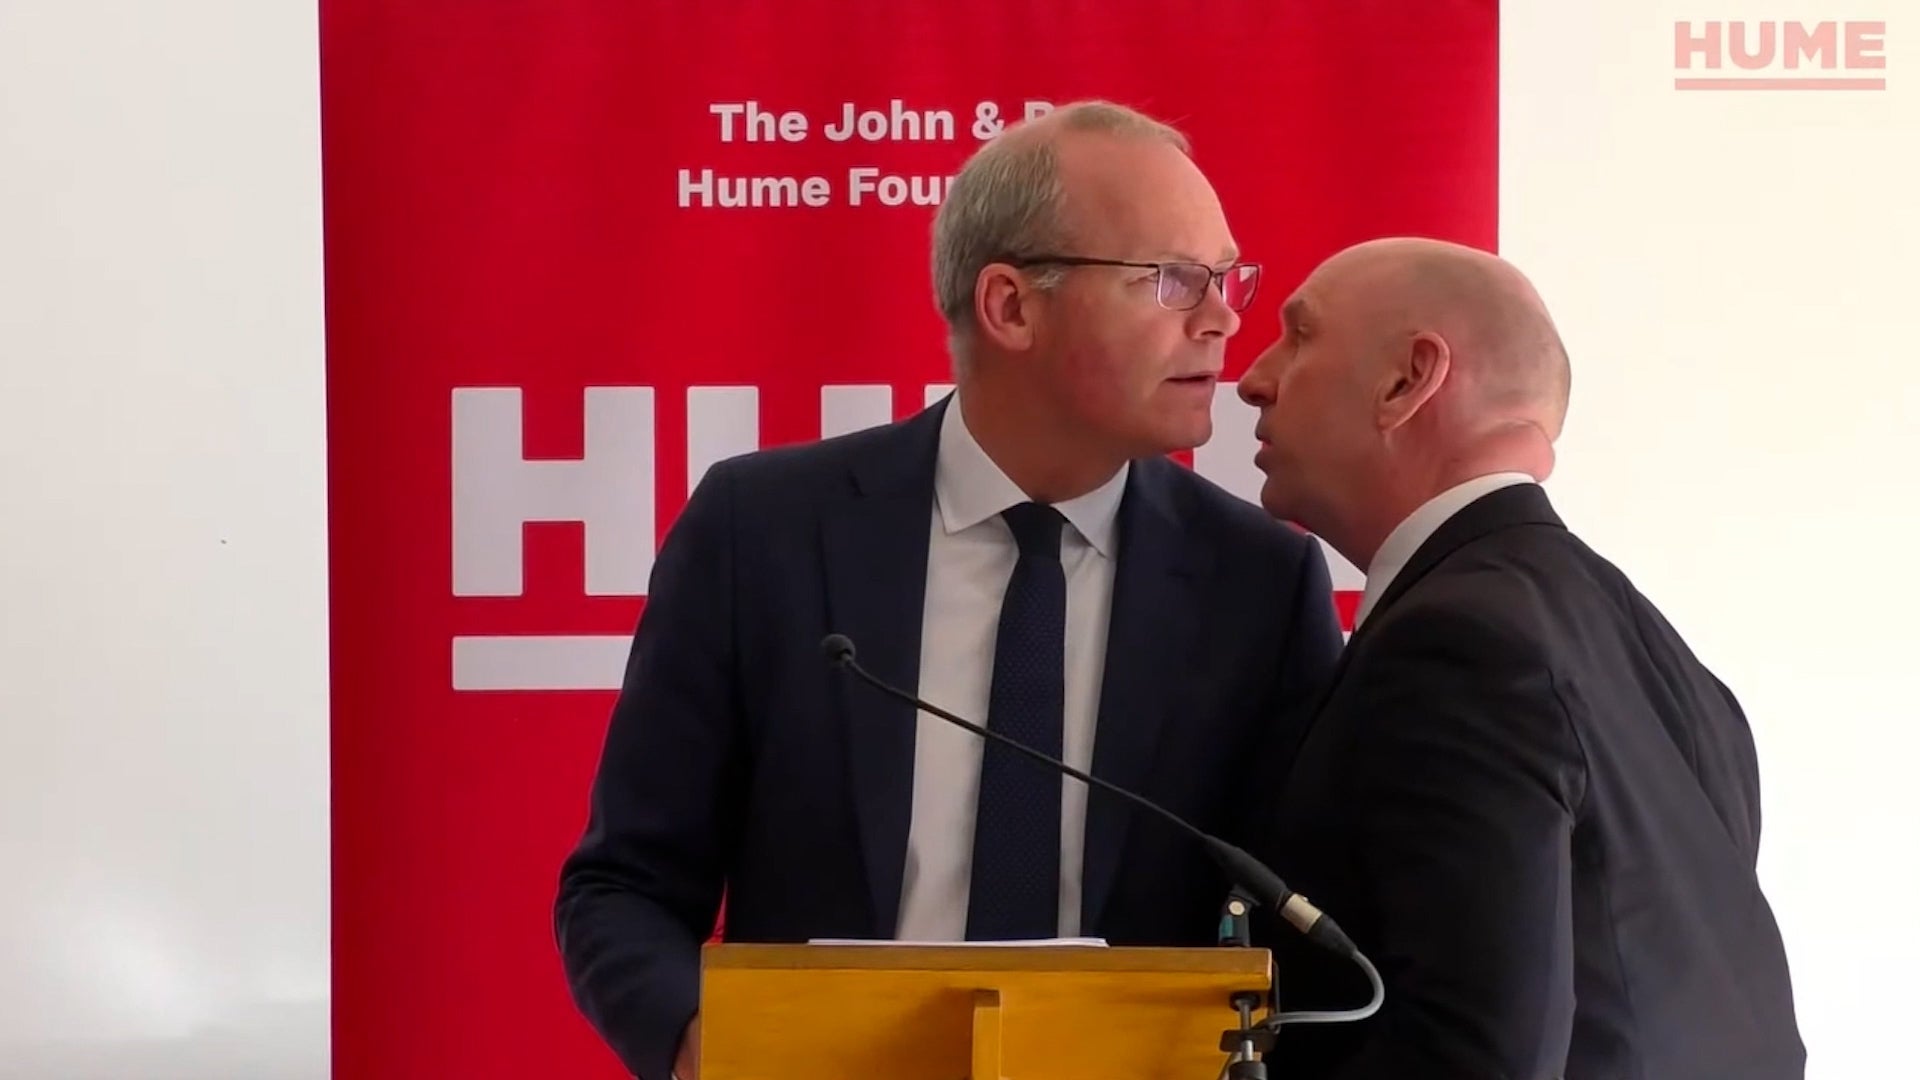 Simon Coveney is ushered from the room at The Houben Centre (Hume Foundation/PA)